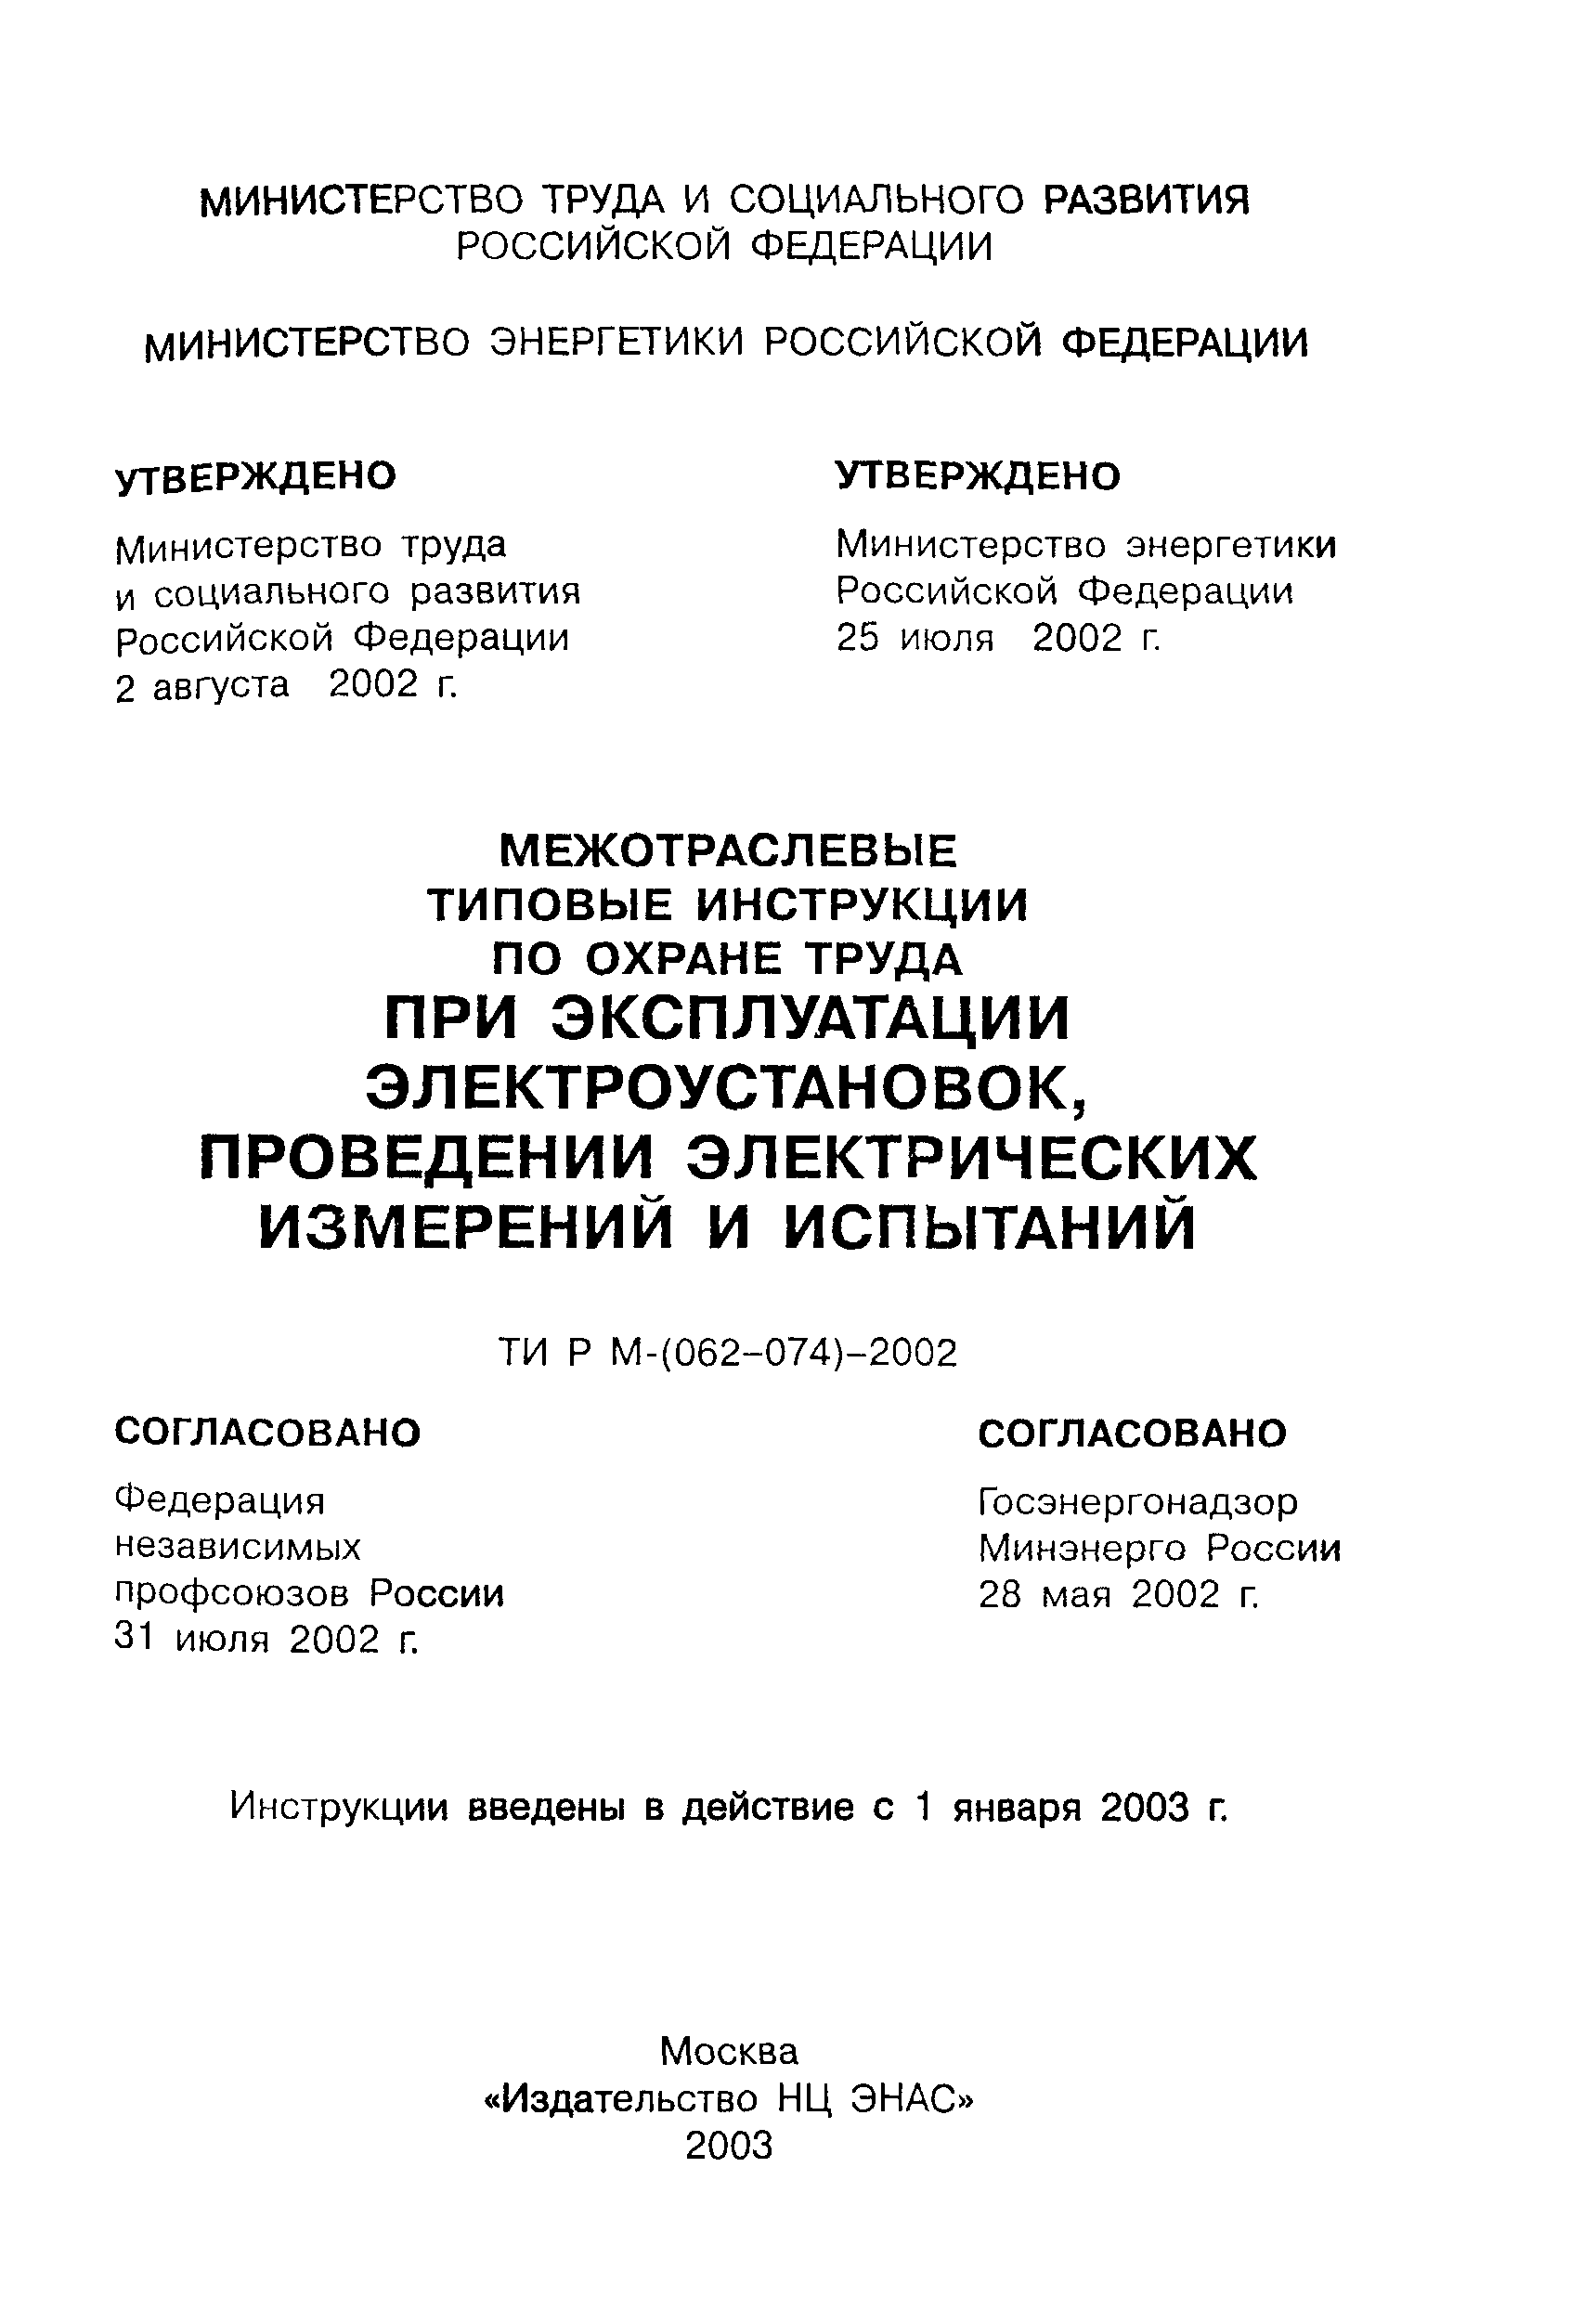 ТИ Р М-068-2002